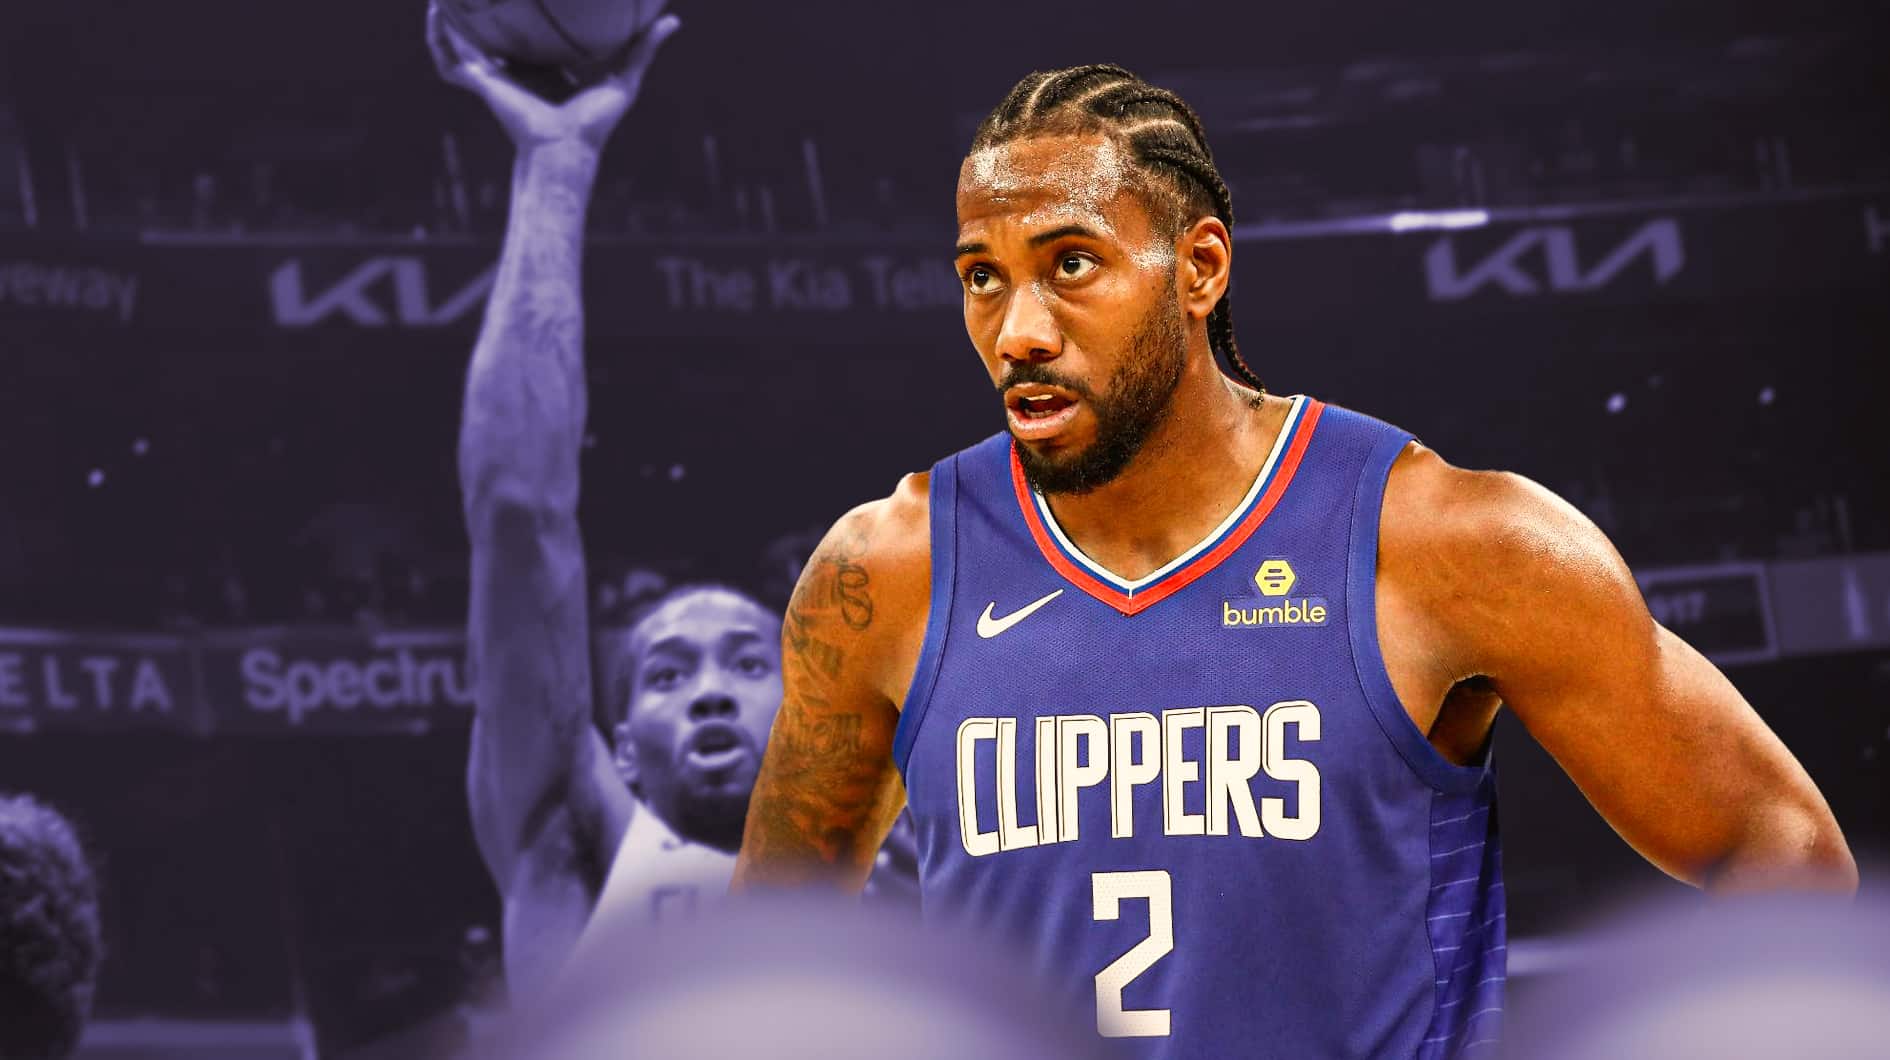 Giant Clippers Trade Kawhi Leonard To Unexpected Eastern Conference Team -  The Wood Cafe